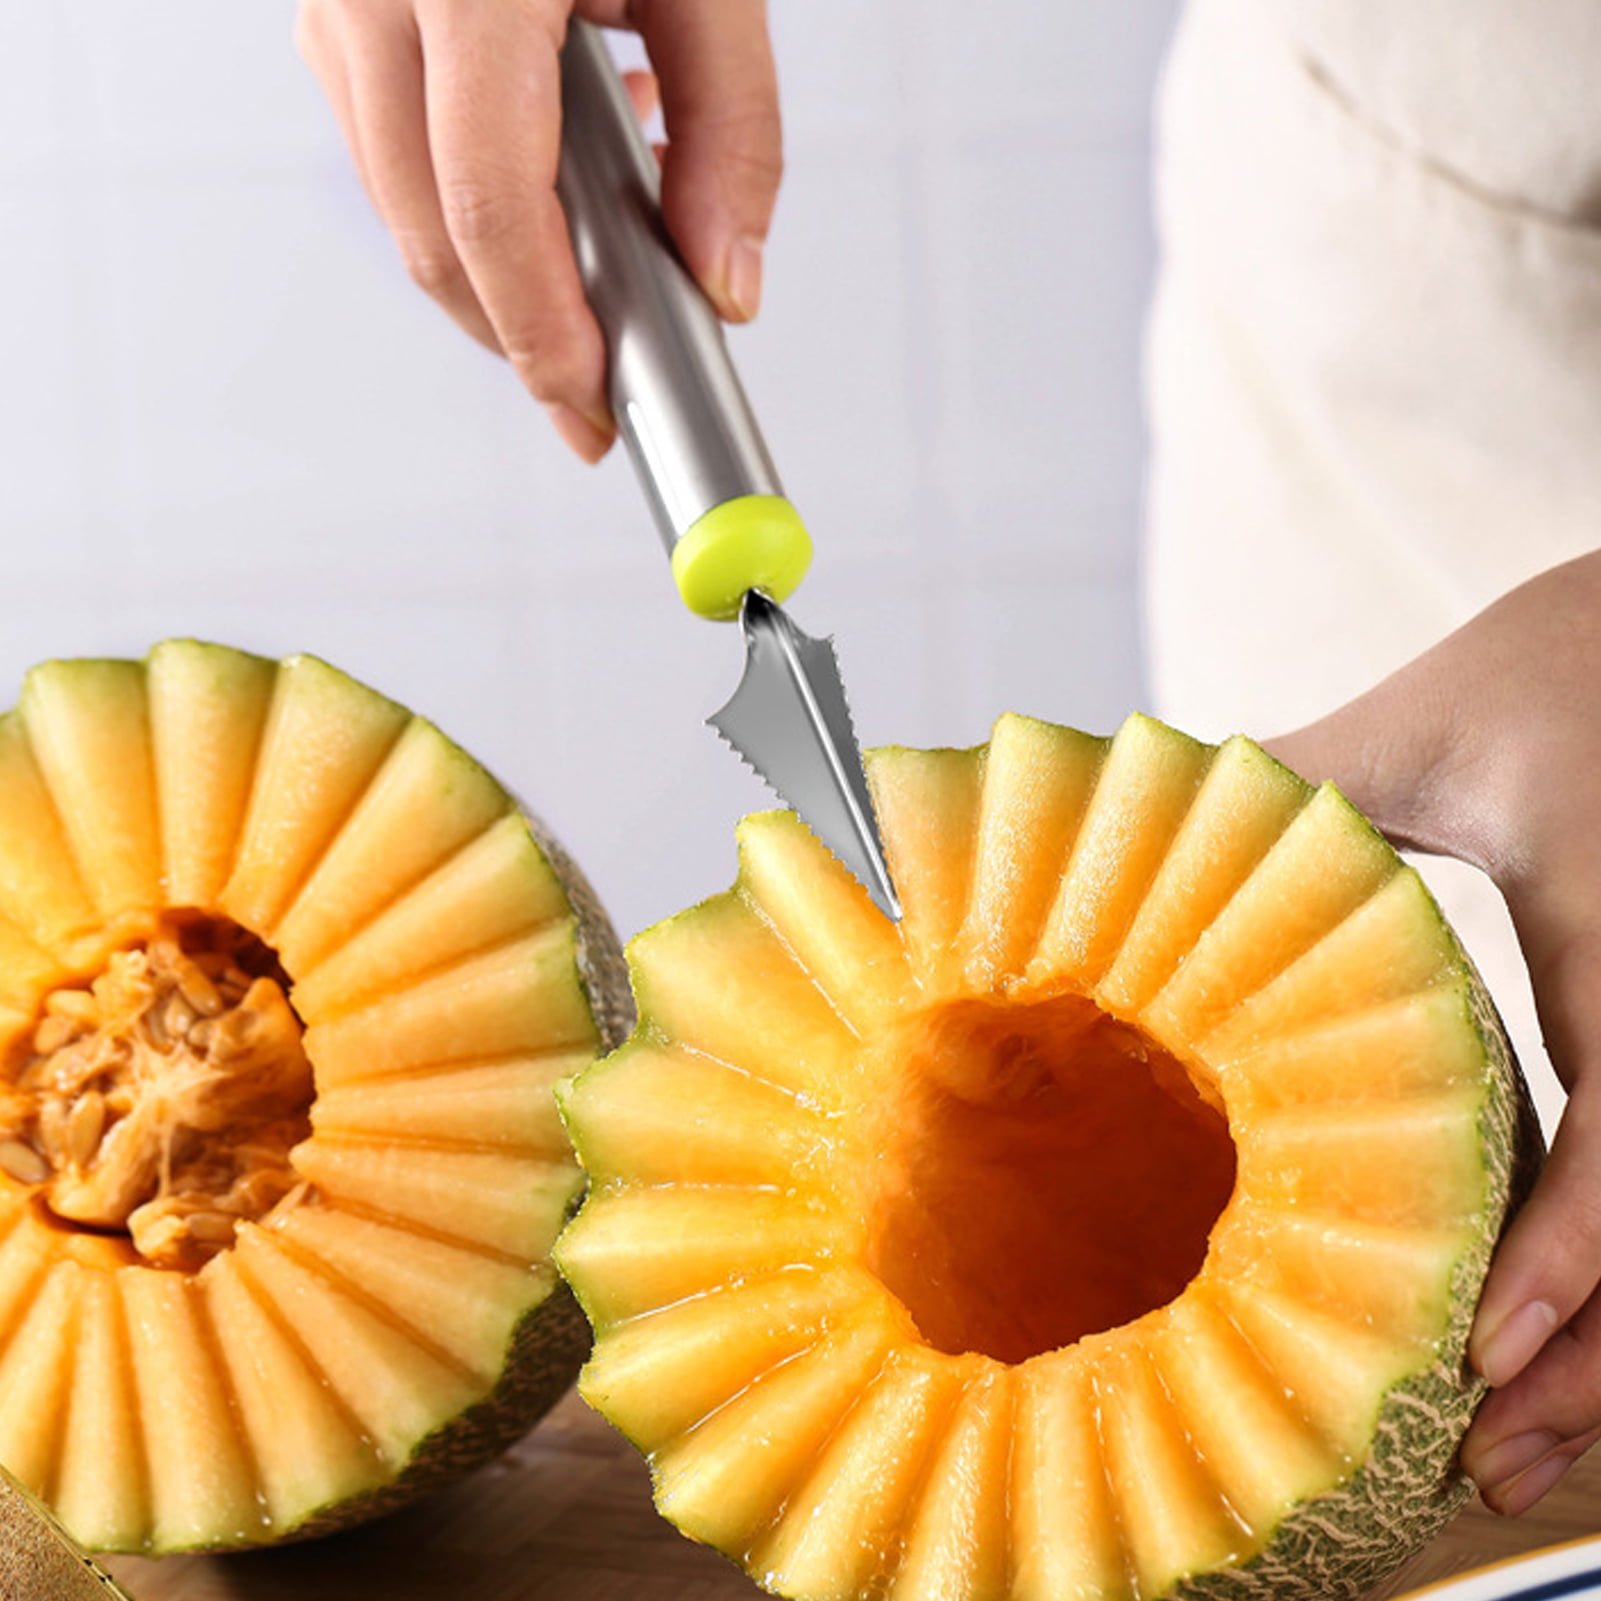 Ucheom Melon Baller Scoop Set, 4 In 1 Stainless Steel Fruit Carving Tools  Set, Fruit Scooper Seed Remover Watermelon Knife, Dig Pulp Separator Fruit